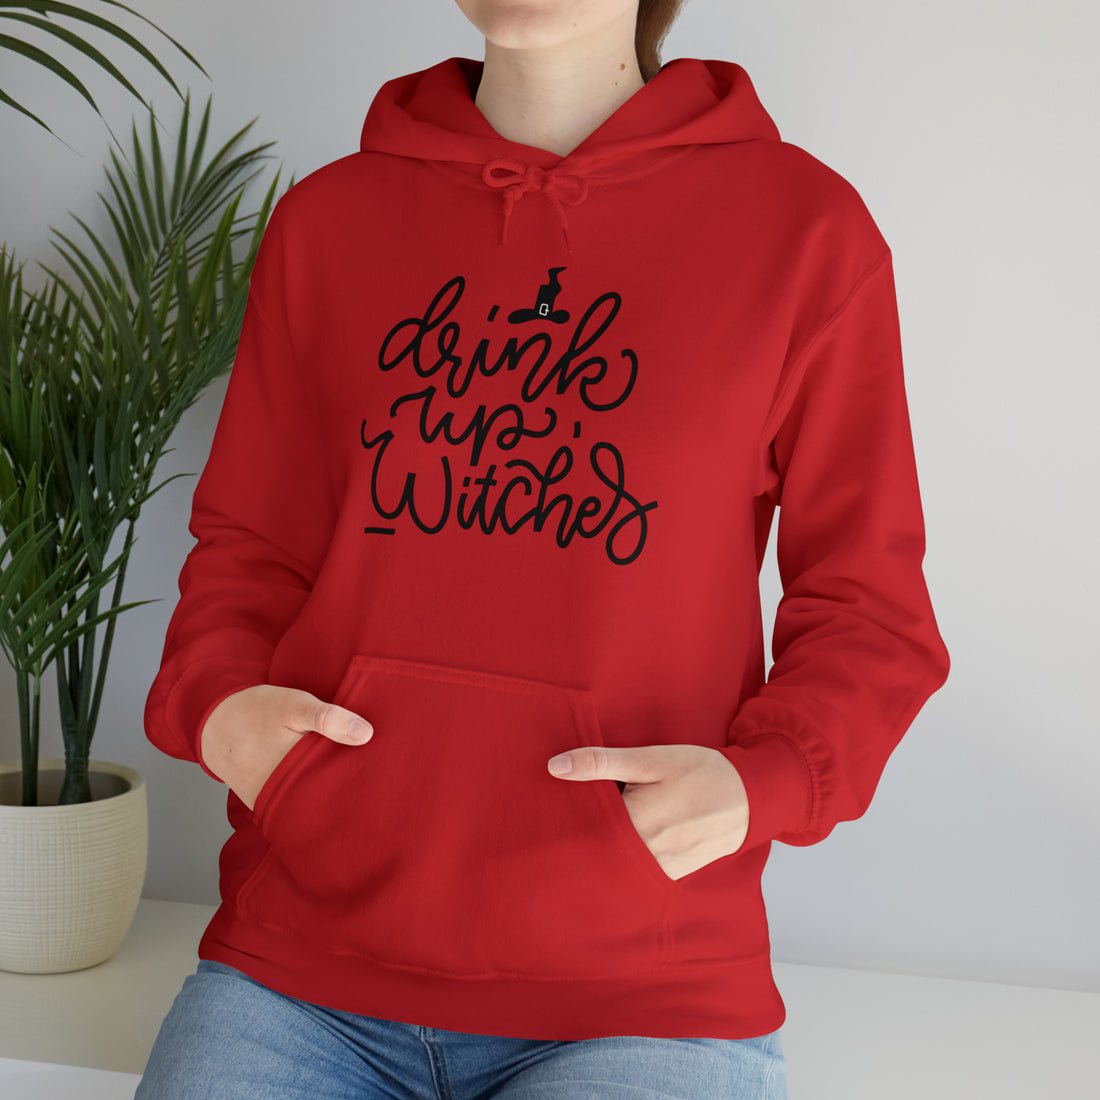 Drink up witches! Halloween Unisex Heavy Blend™ Hooded Sweatshirt in Multiple Colors